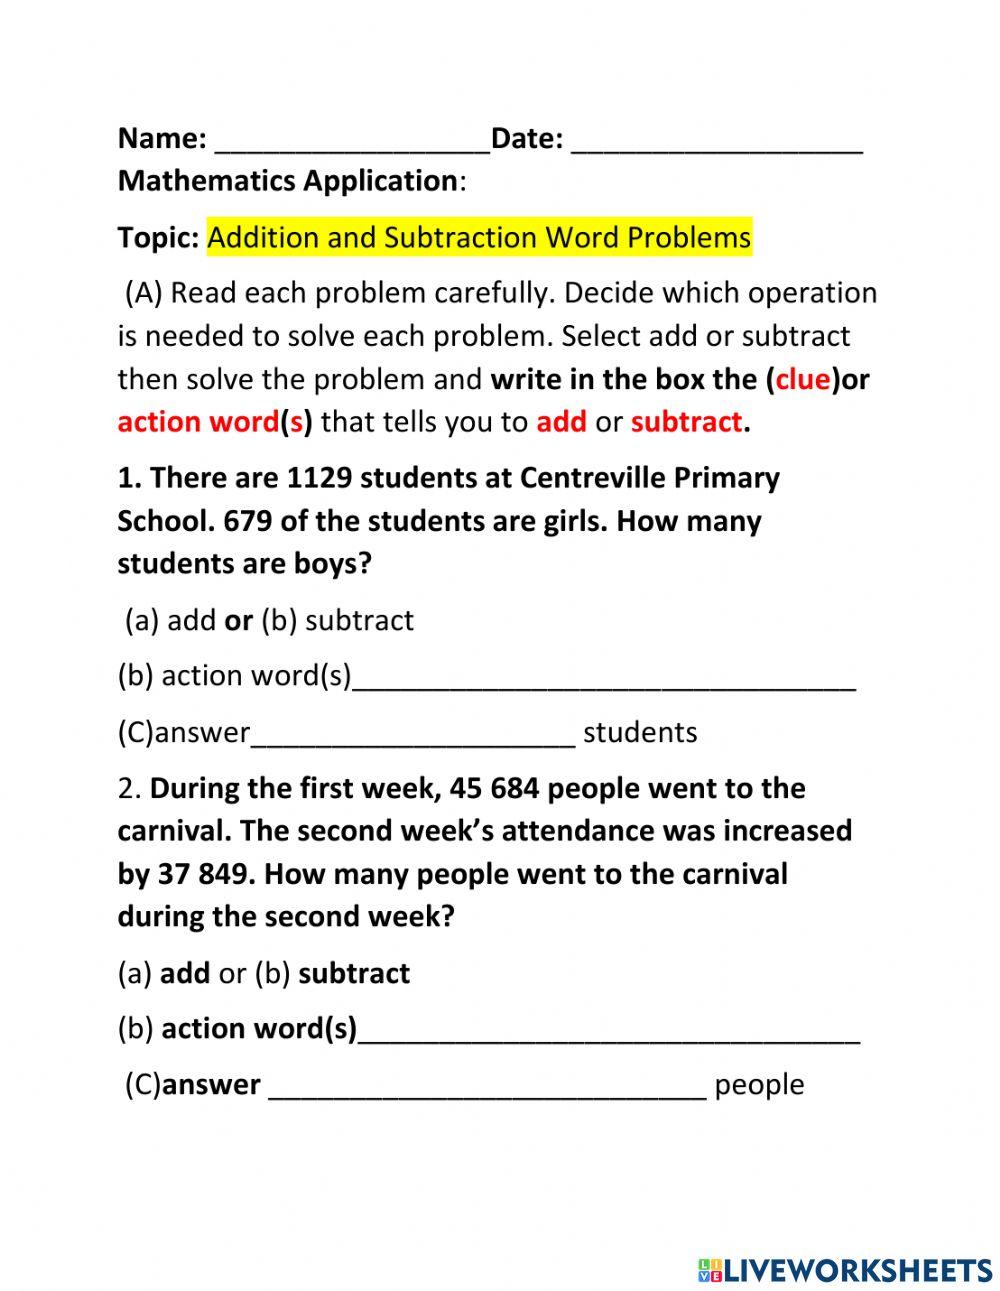 Addition and Subtracting Word Problems